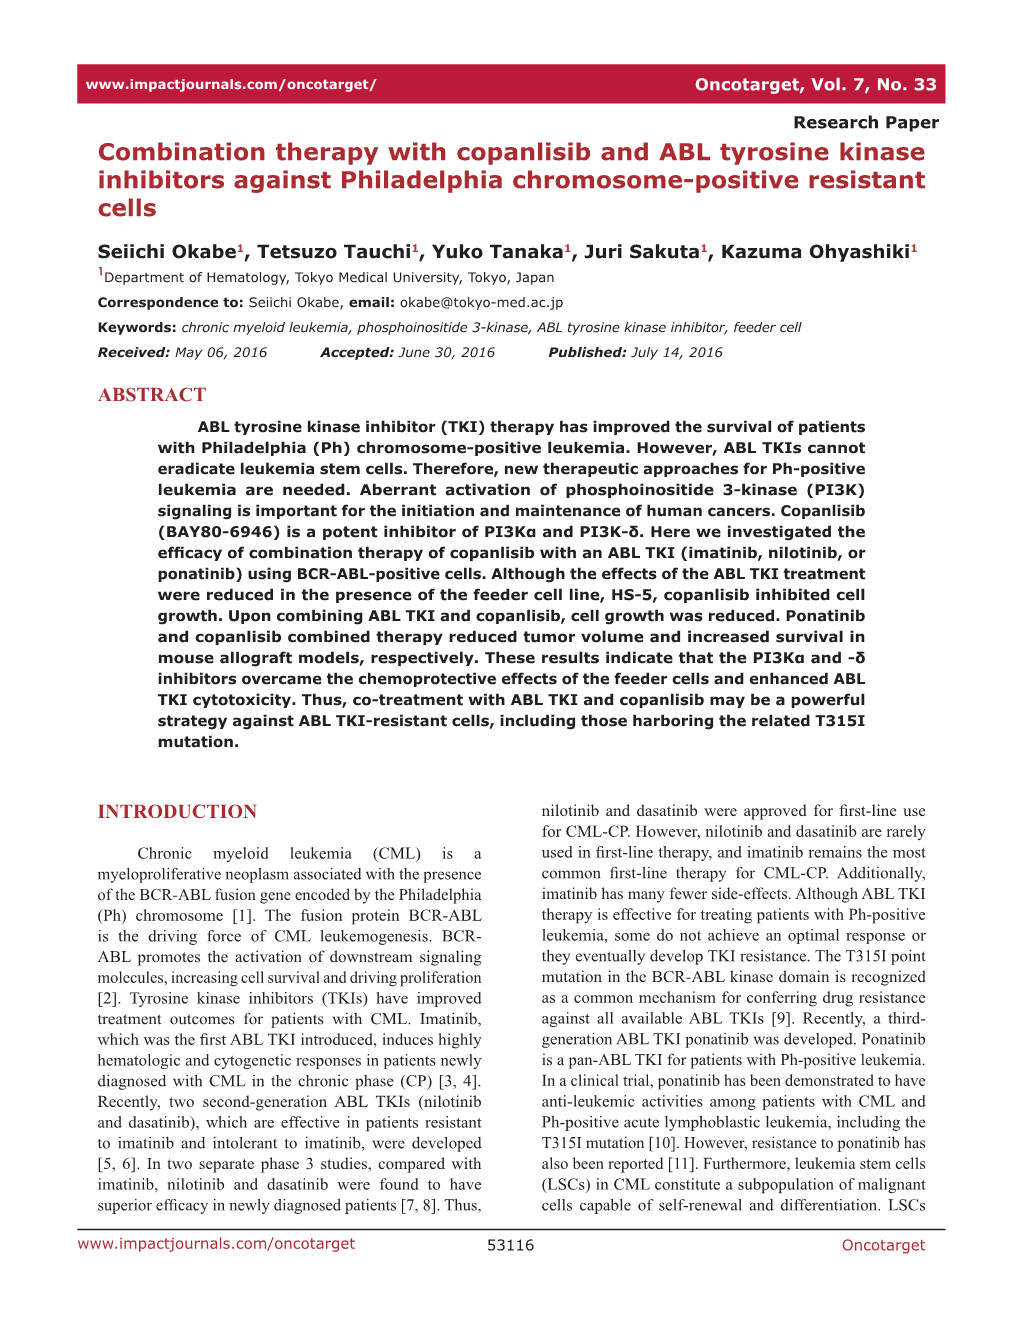 Combination Therapy with Copanlisib and ABL Tyrosine Kinase Inhibitors Against Philadelphia Chromosome-Positive Resistant Cells